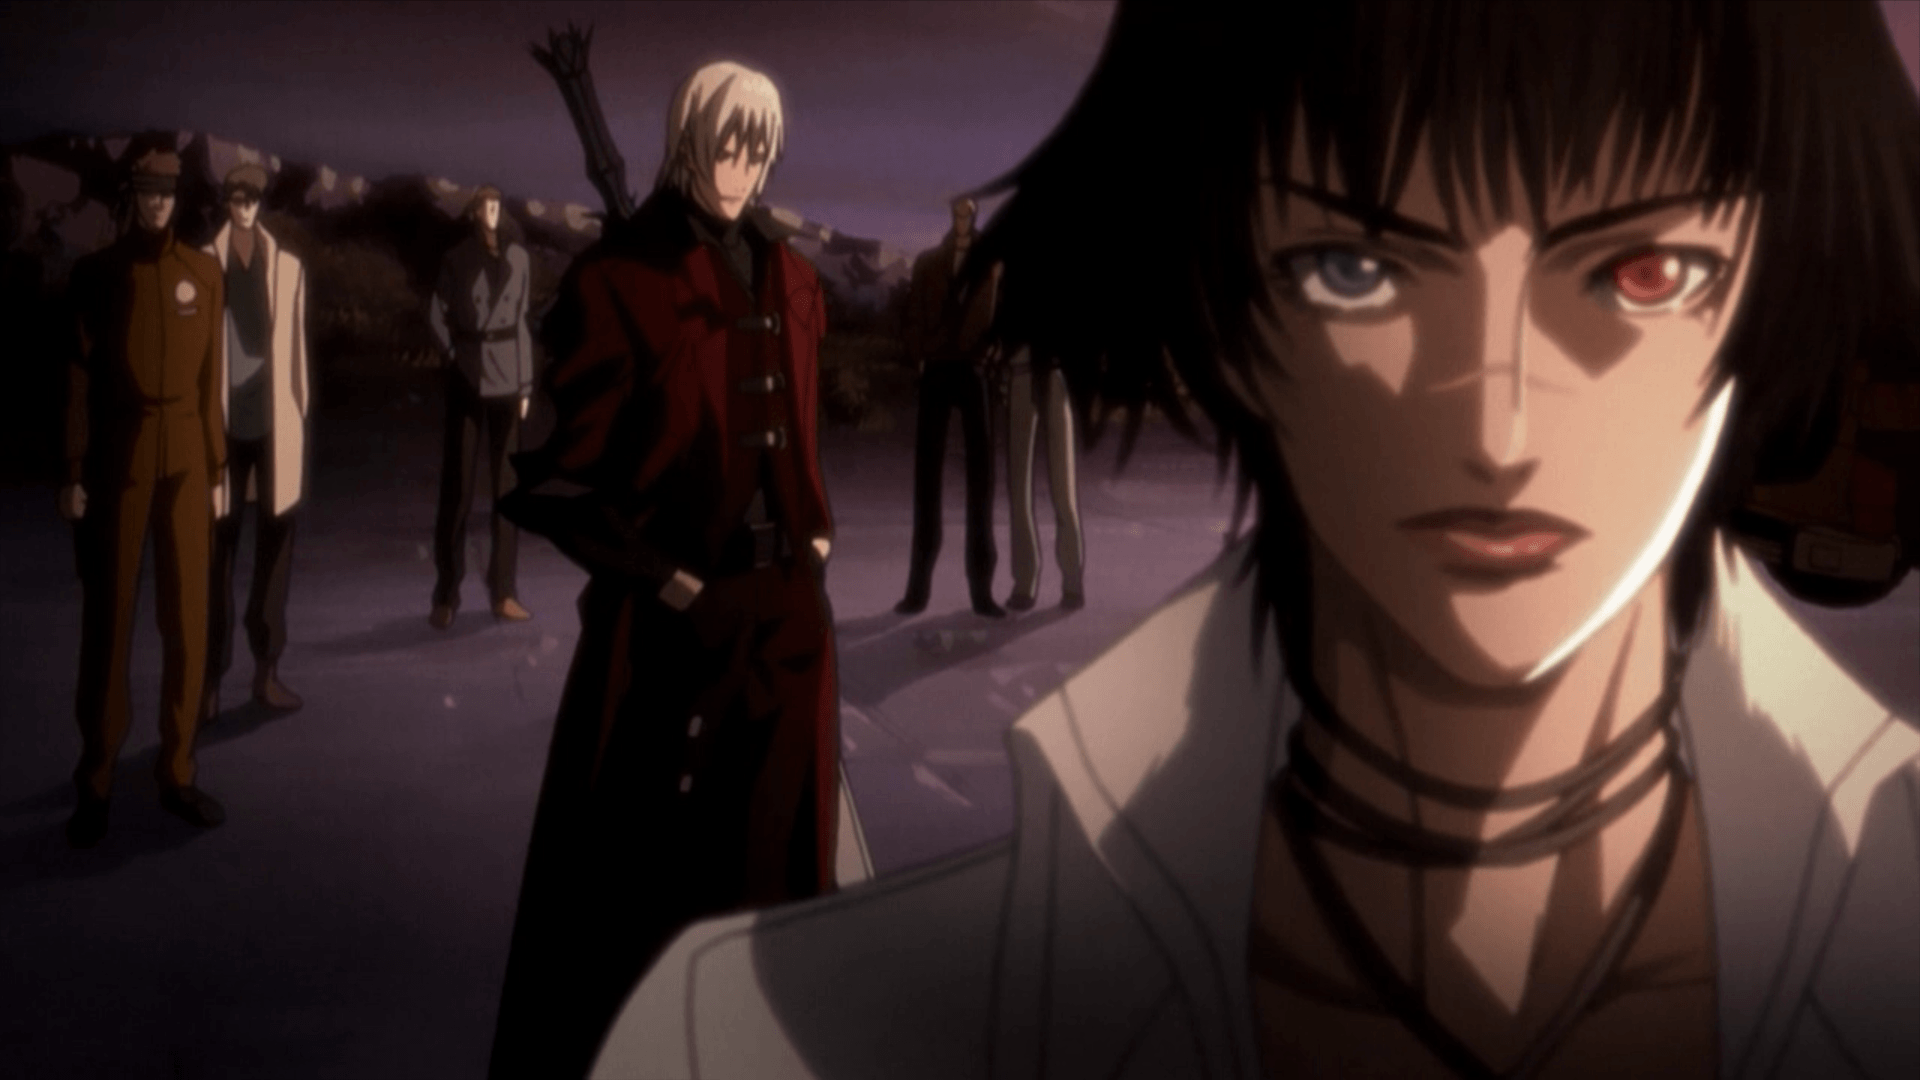 Anime wallpaper devil may cry 2560x1600 168532 es